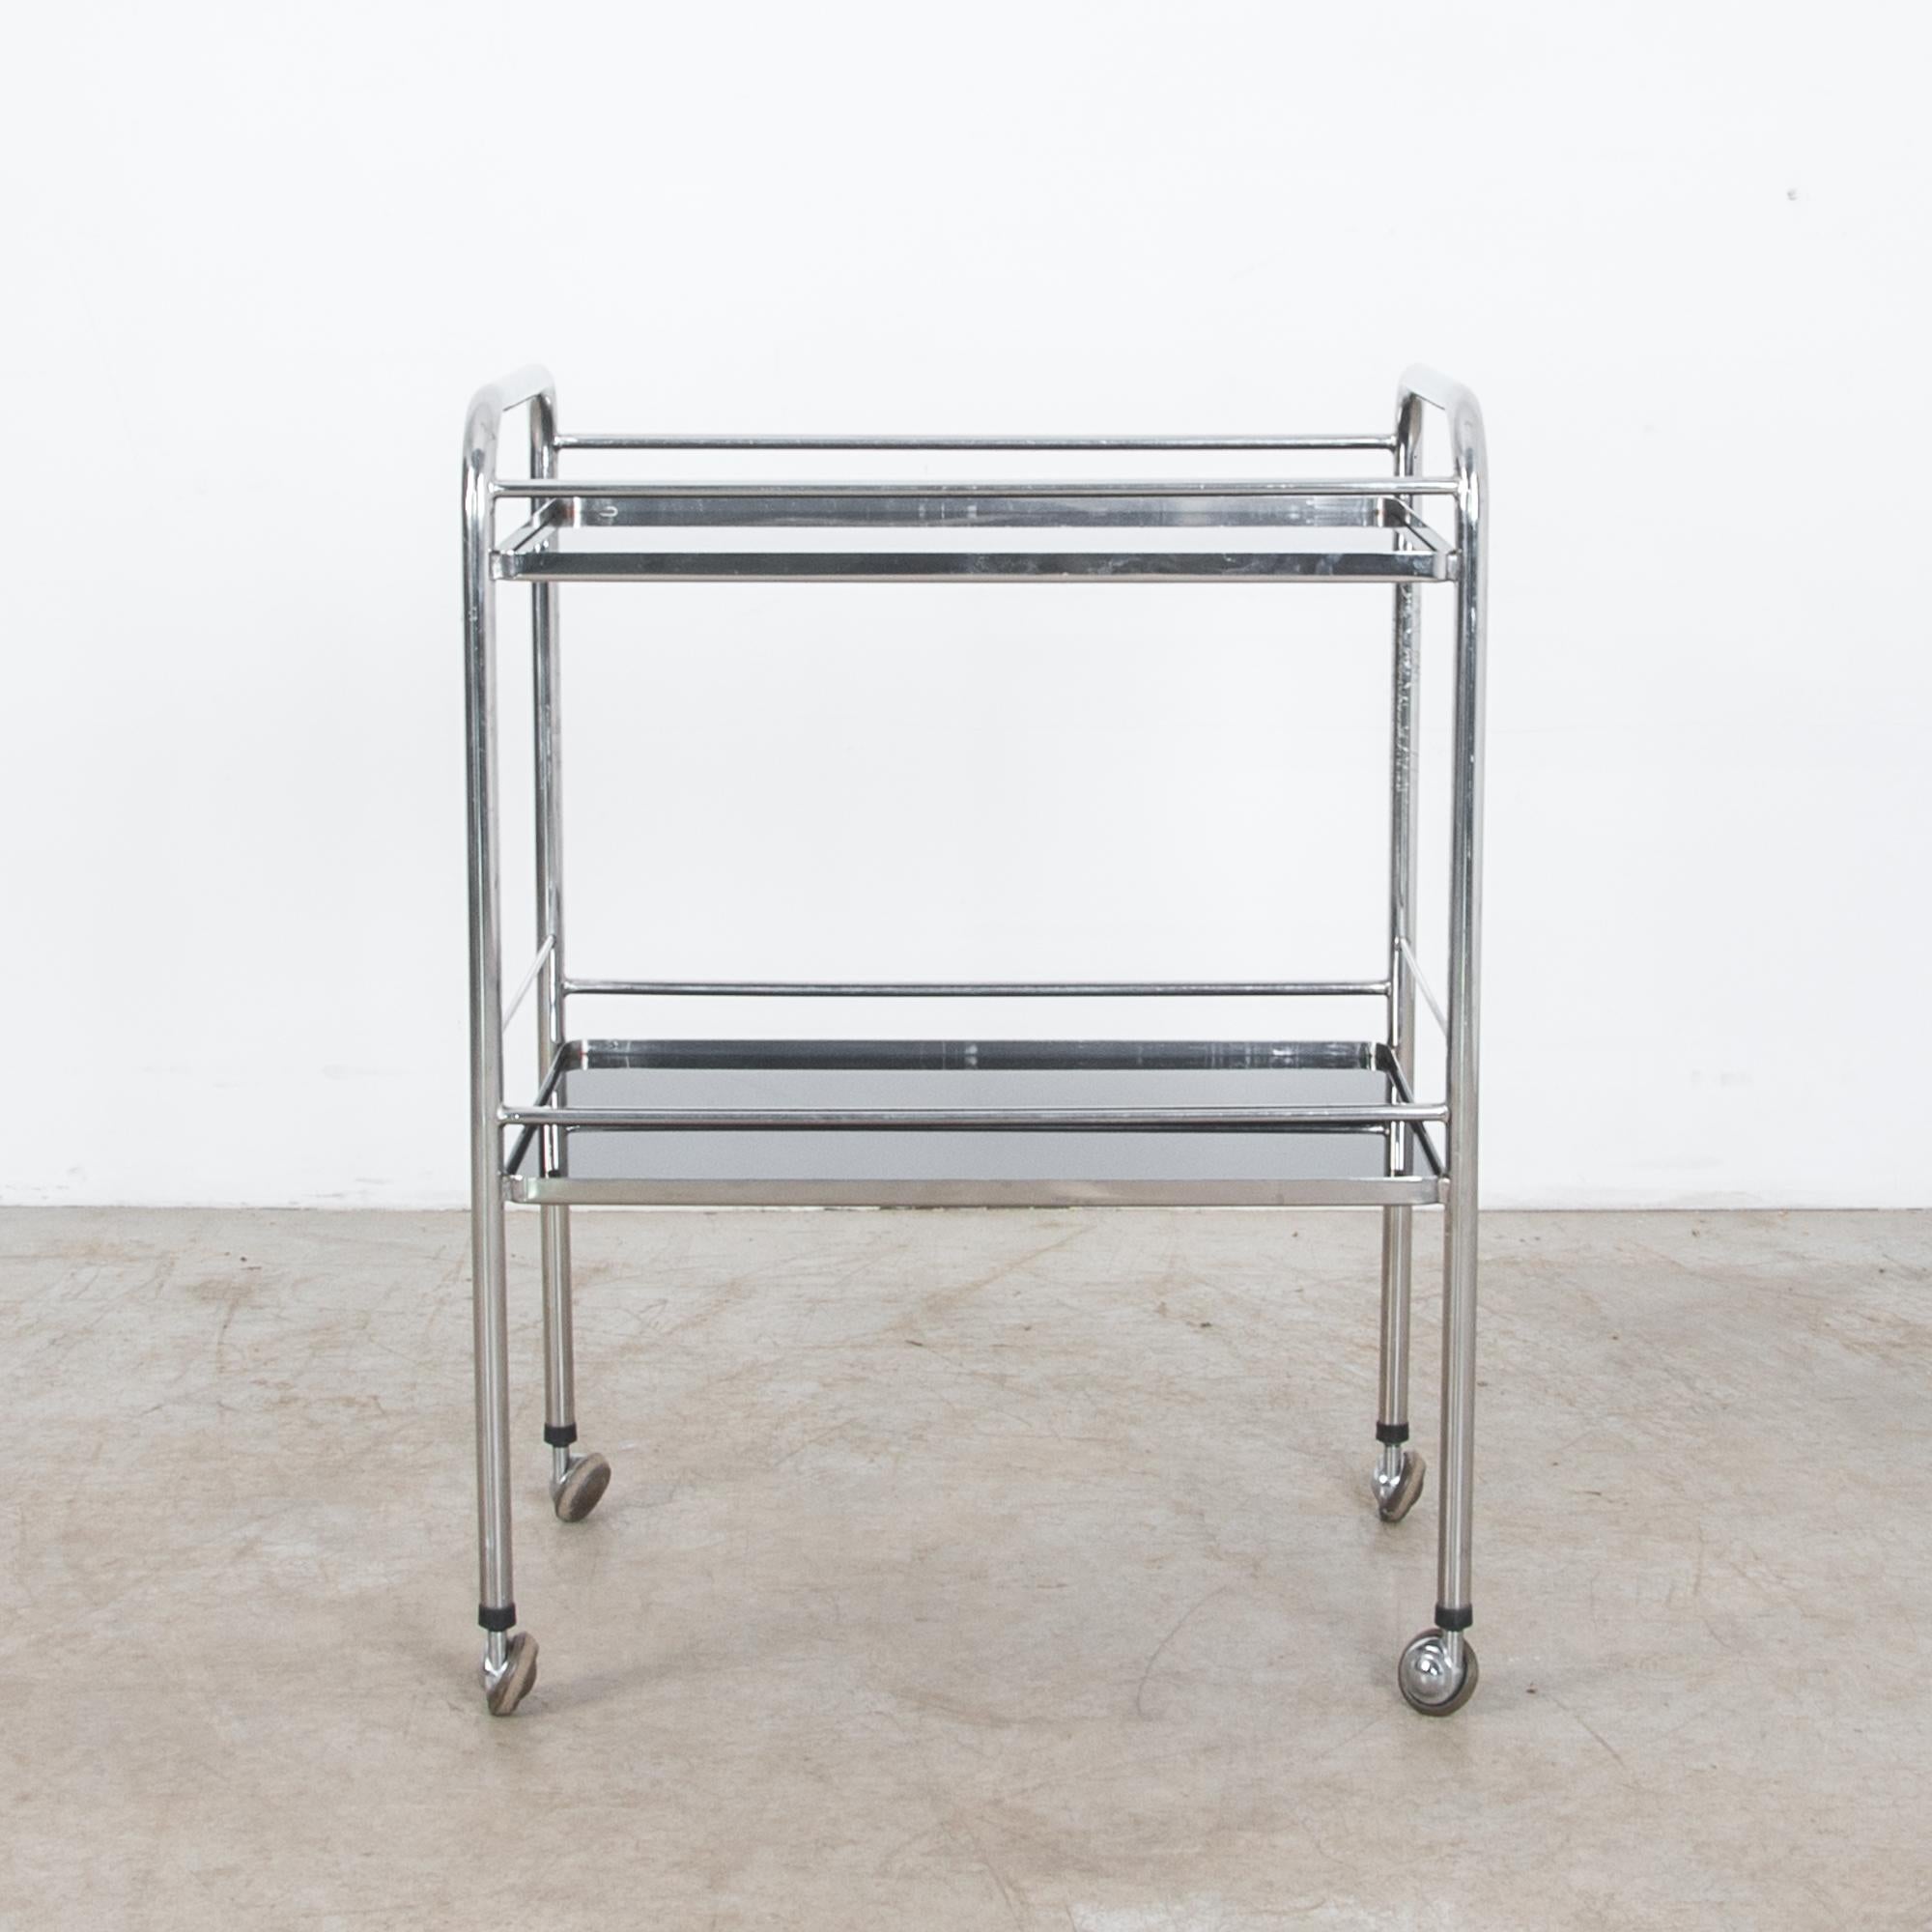 From France, circa 1960, a sleek rolling cart in modern style. Made from tubular steel and glass, this cart utilizes clean and modern materials, with an equally crisp composition. Straight lines and rounded edges give a proper geometric appearance